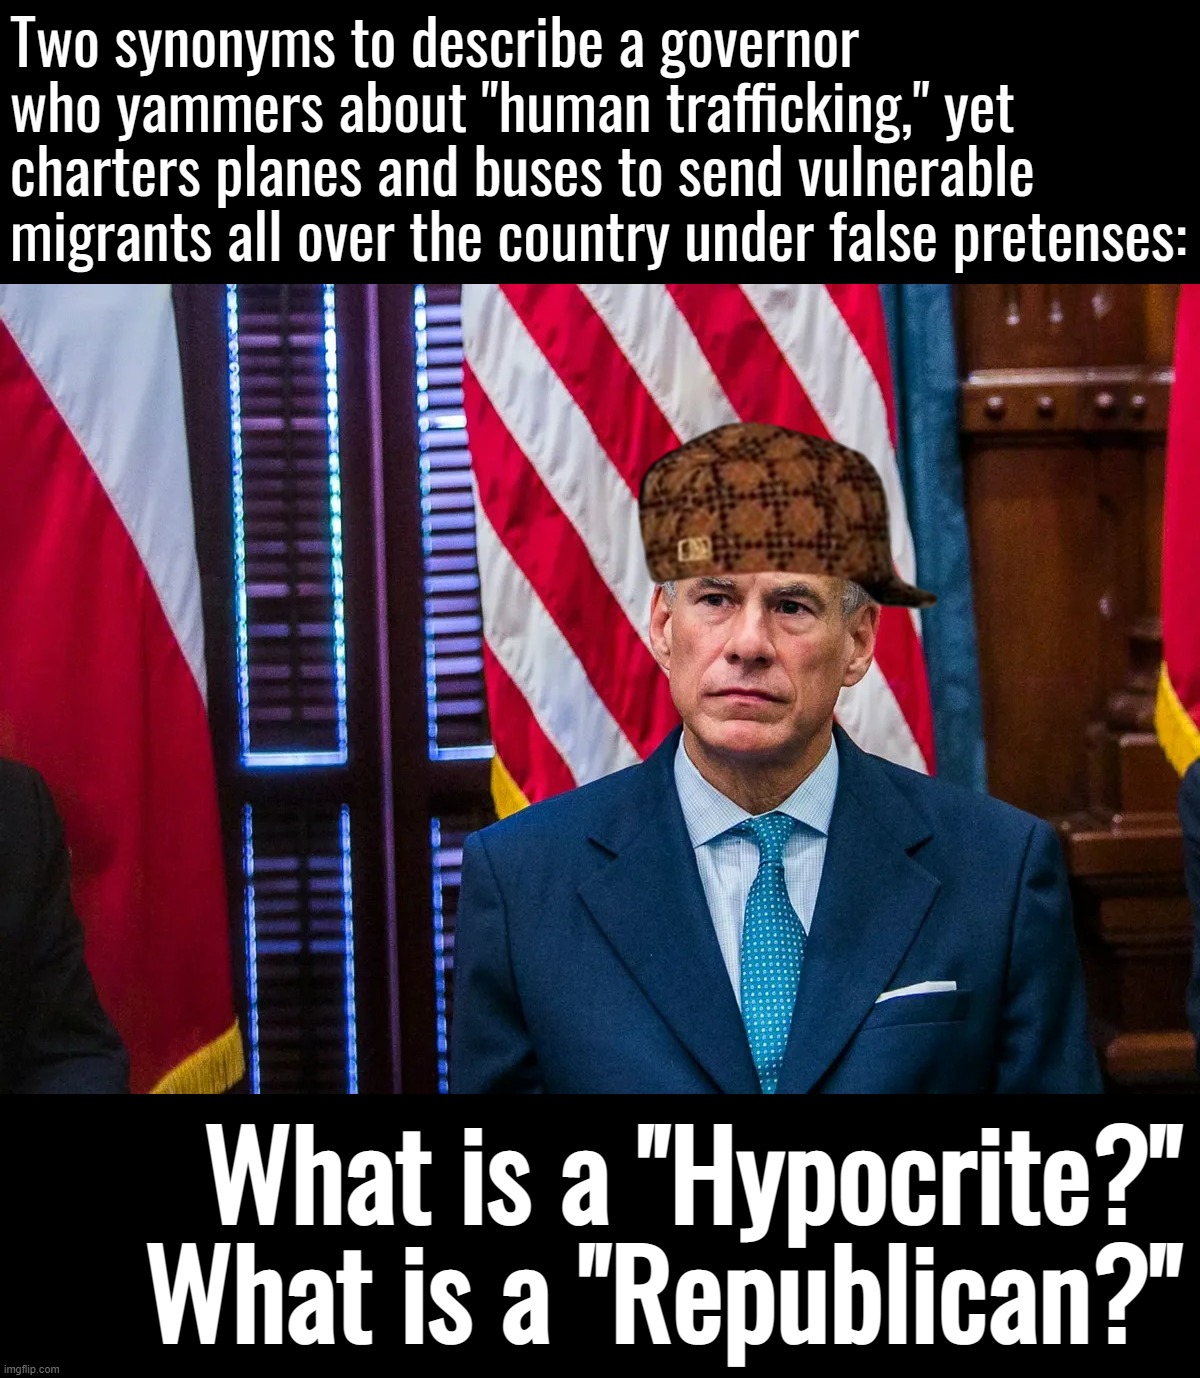 Scumbag Greg Abbott | Two synonyms to describe a governor who yammers about "human trafficking," yet charters planes and buses to send vulnerable migrants all over the country under false pretenses:; What is a "Hypocrite?" What is a "Republican?" | image tagged in texas governor greg abbott,human trafficking,gop hypocrite,conservative hypocrisy,hypocrites,hypocrite | made w/ Imgflip meme maker